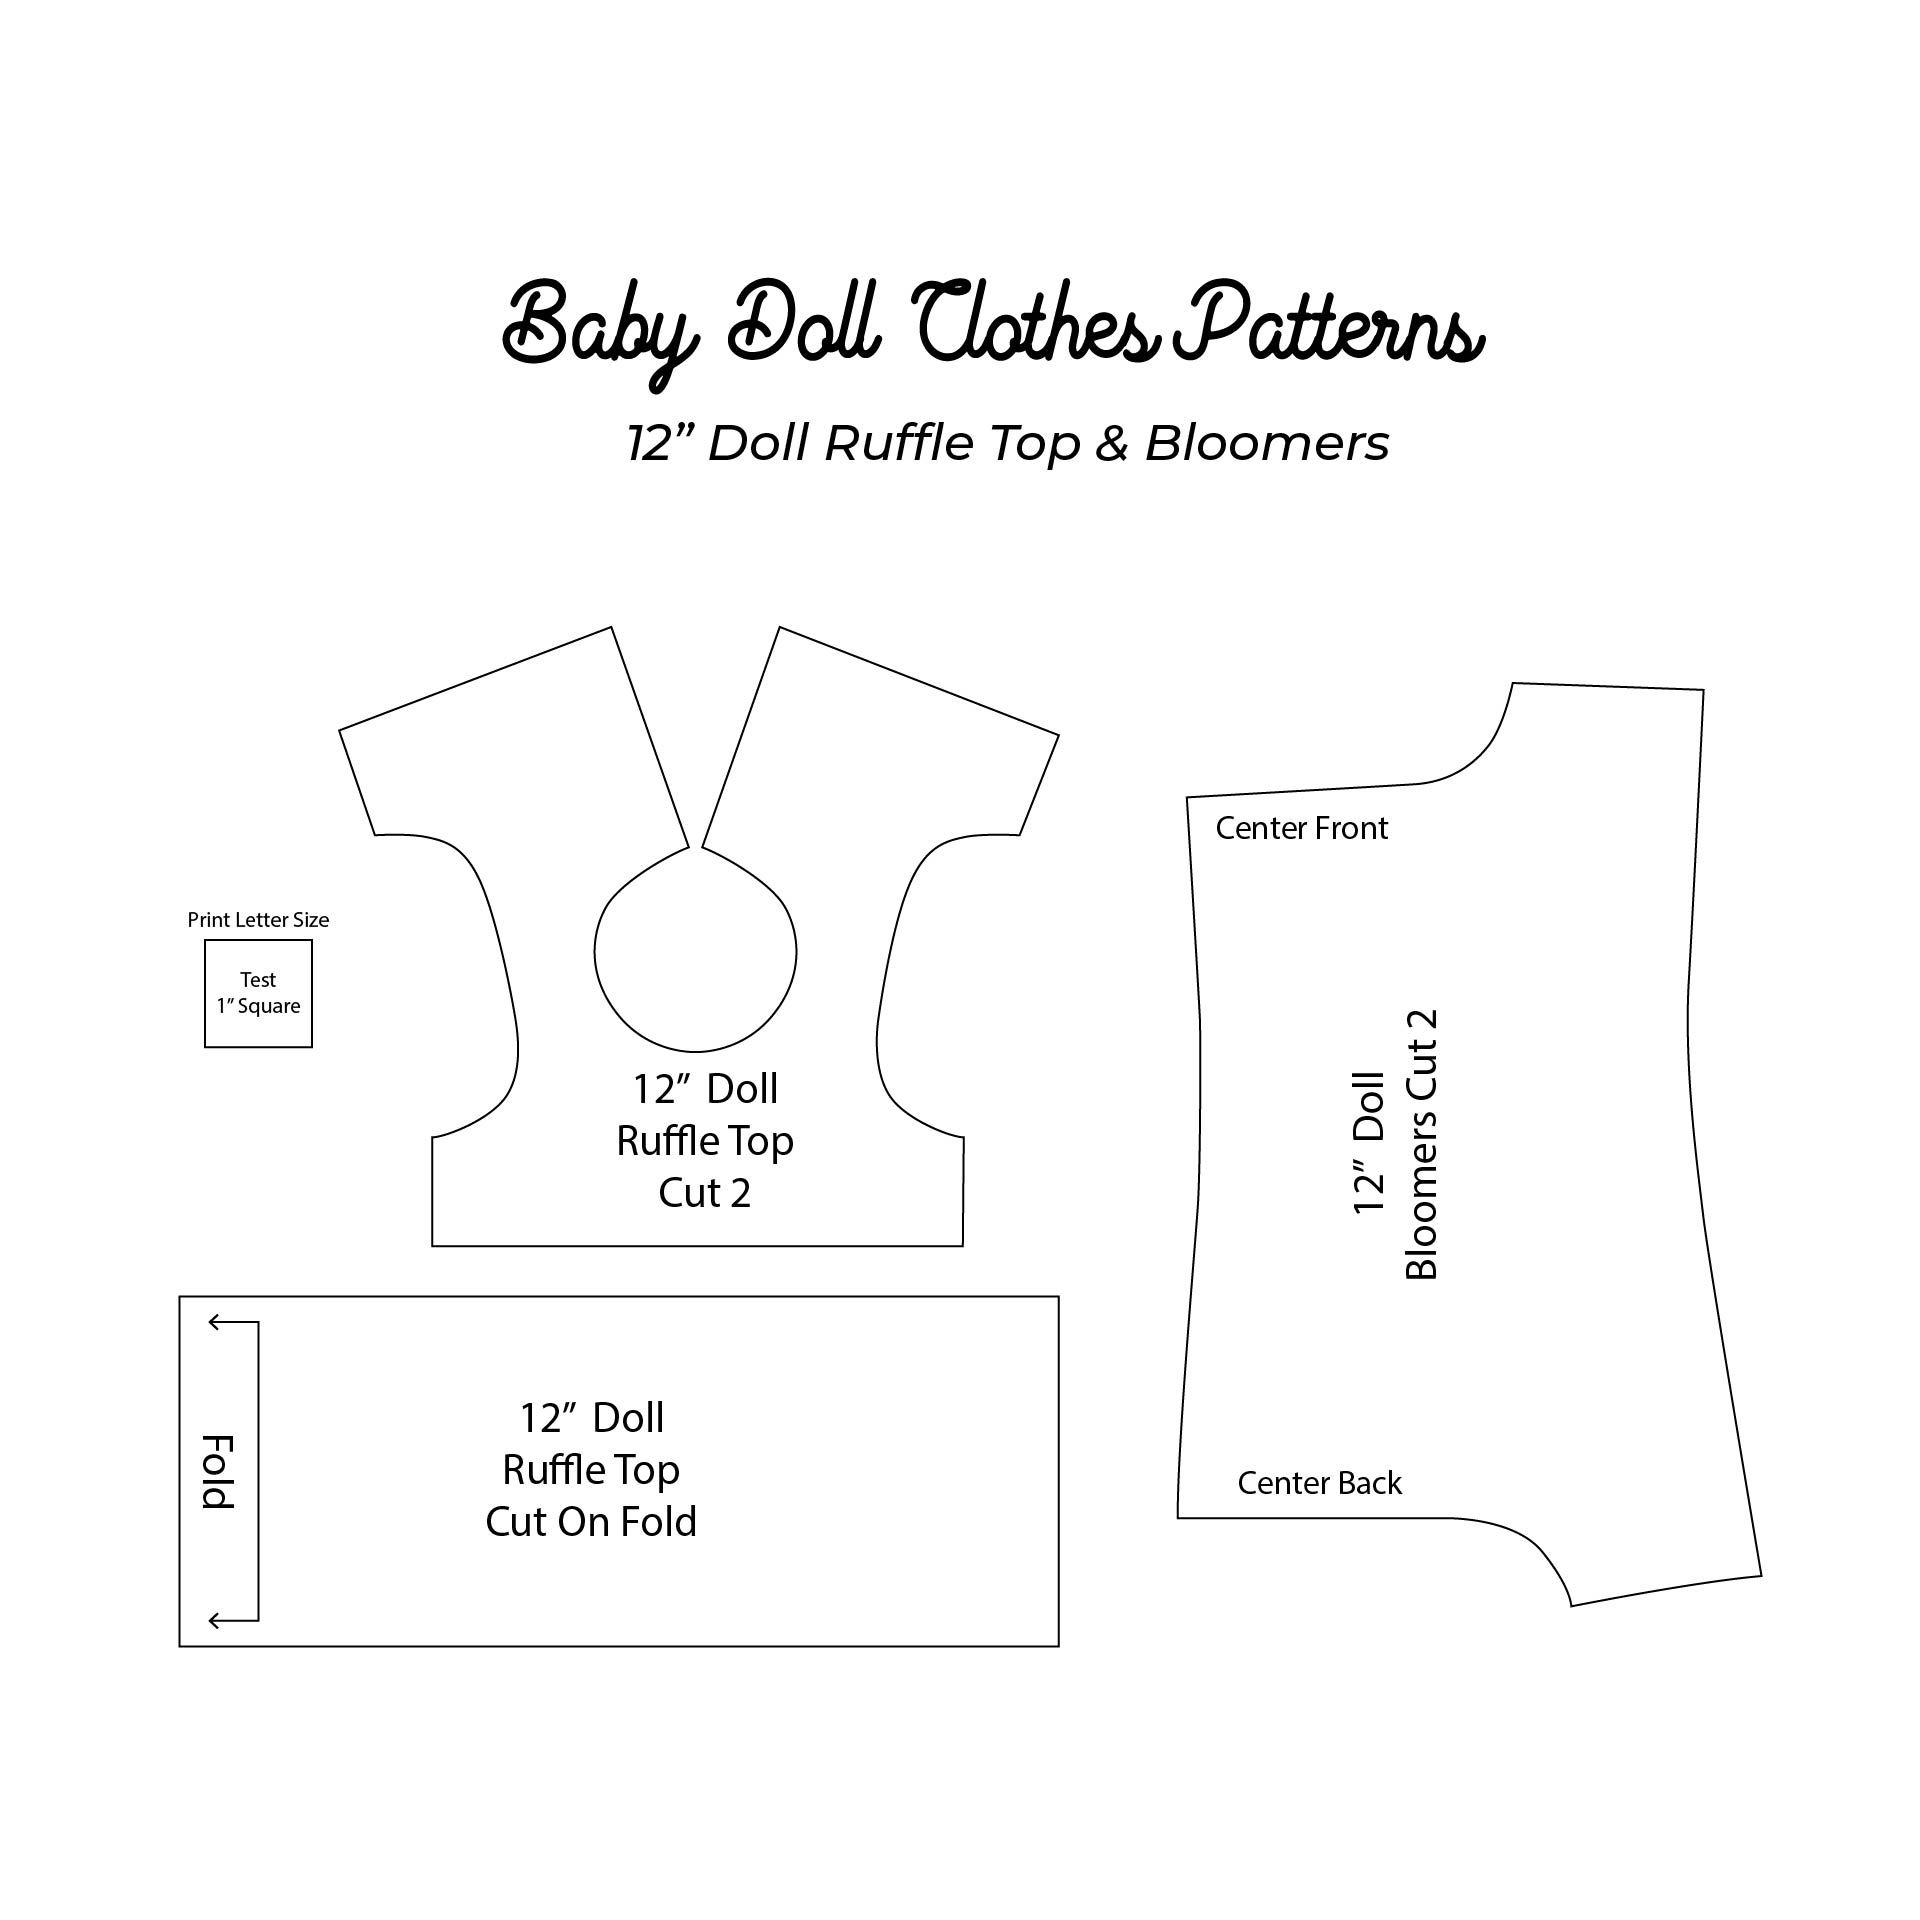 Printable 12 Inch Baby Doll Clothes Patterns | Doll Clothes - Free Printable Baby Doll Clothes Patterns